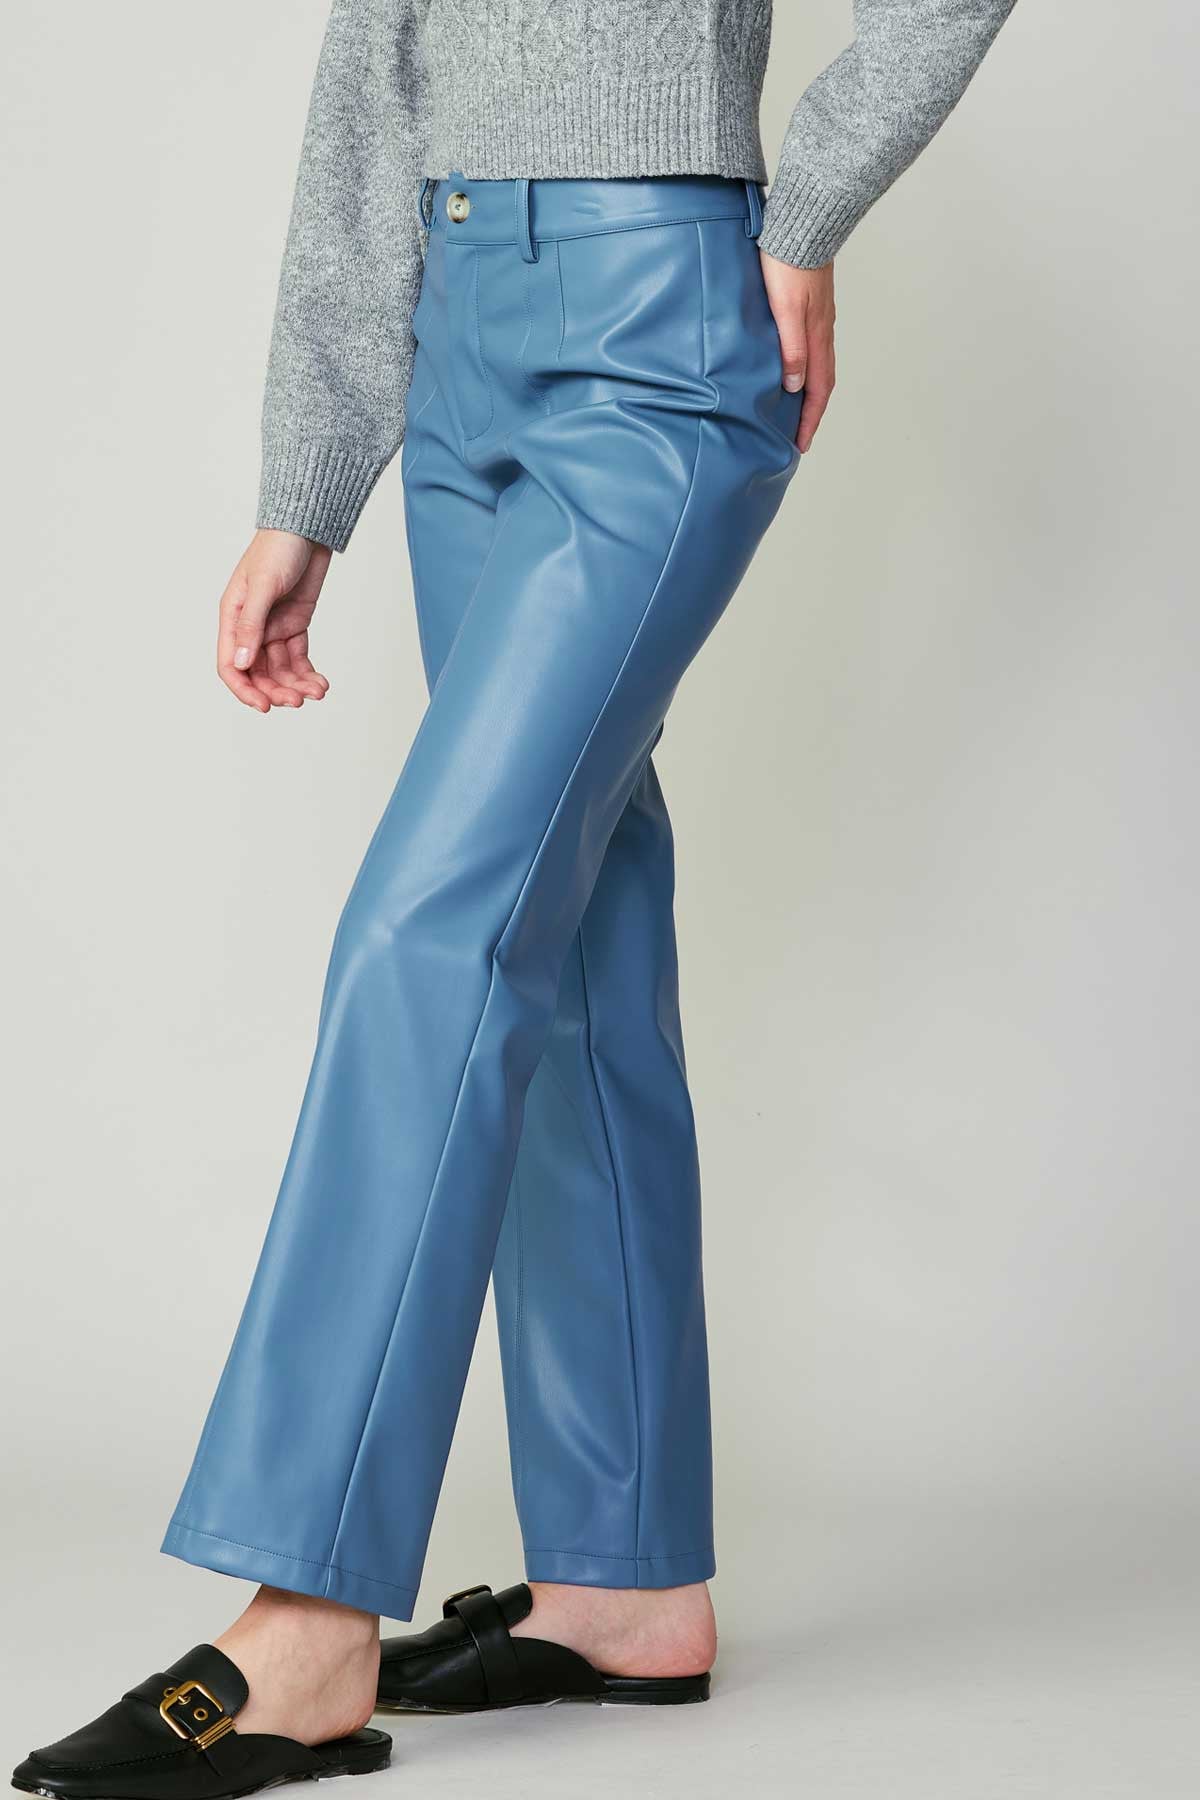 Tranquil Straight Leg PU Leather Pant- Blue